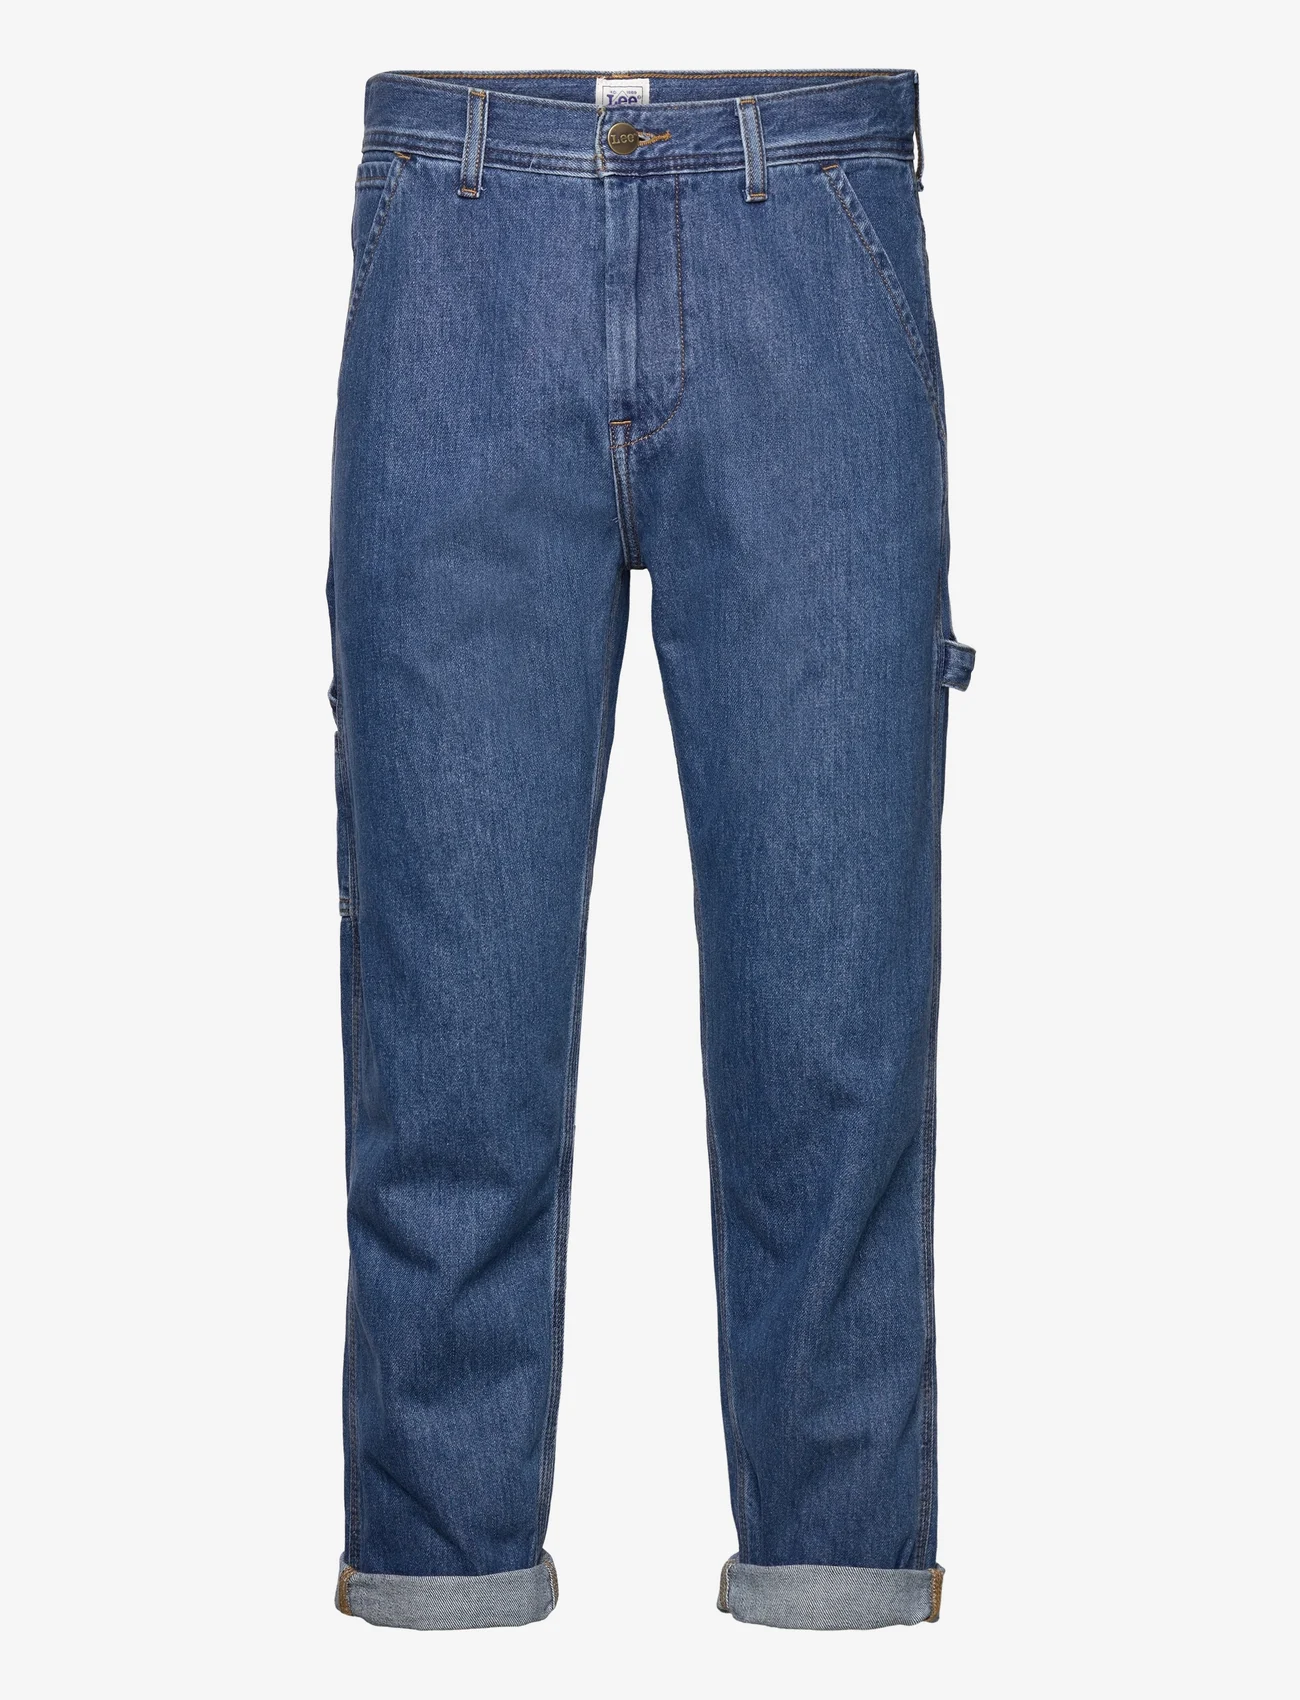 Lee Jeans - CARPENTER - loose jeans - mid shade - 0